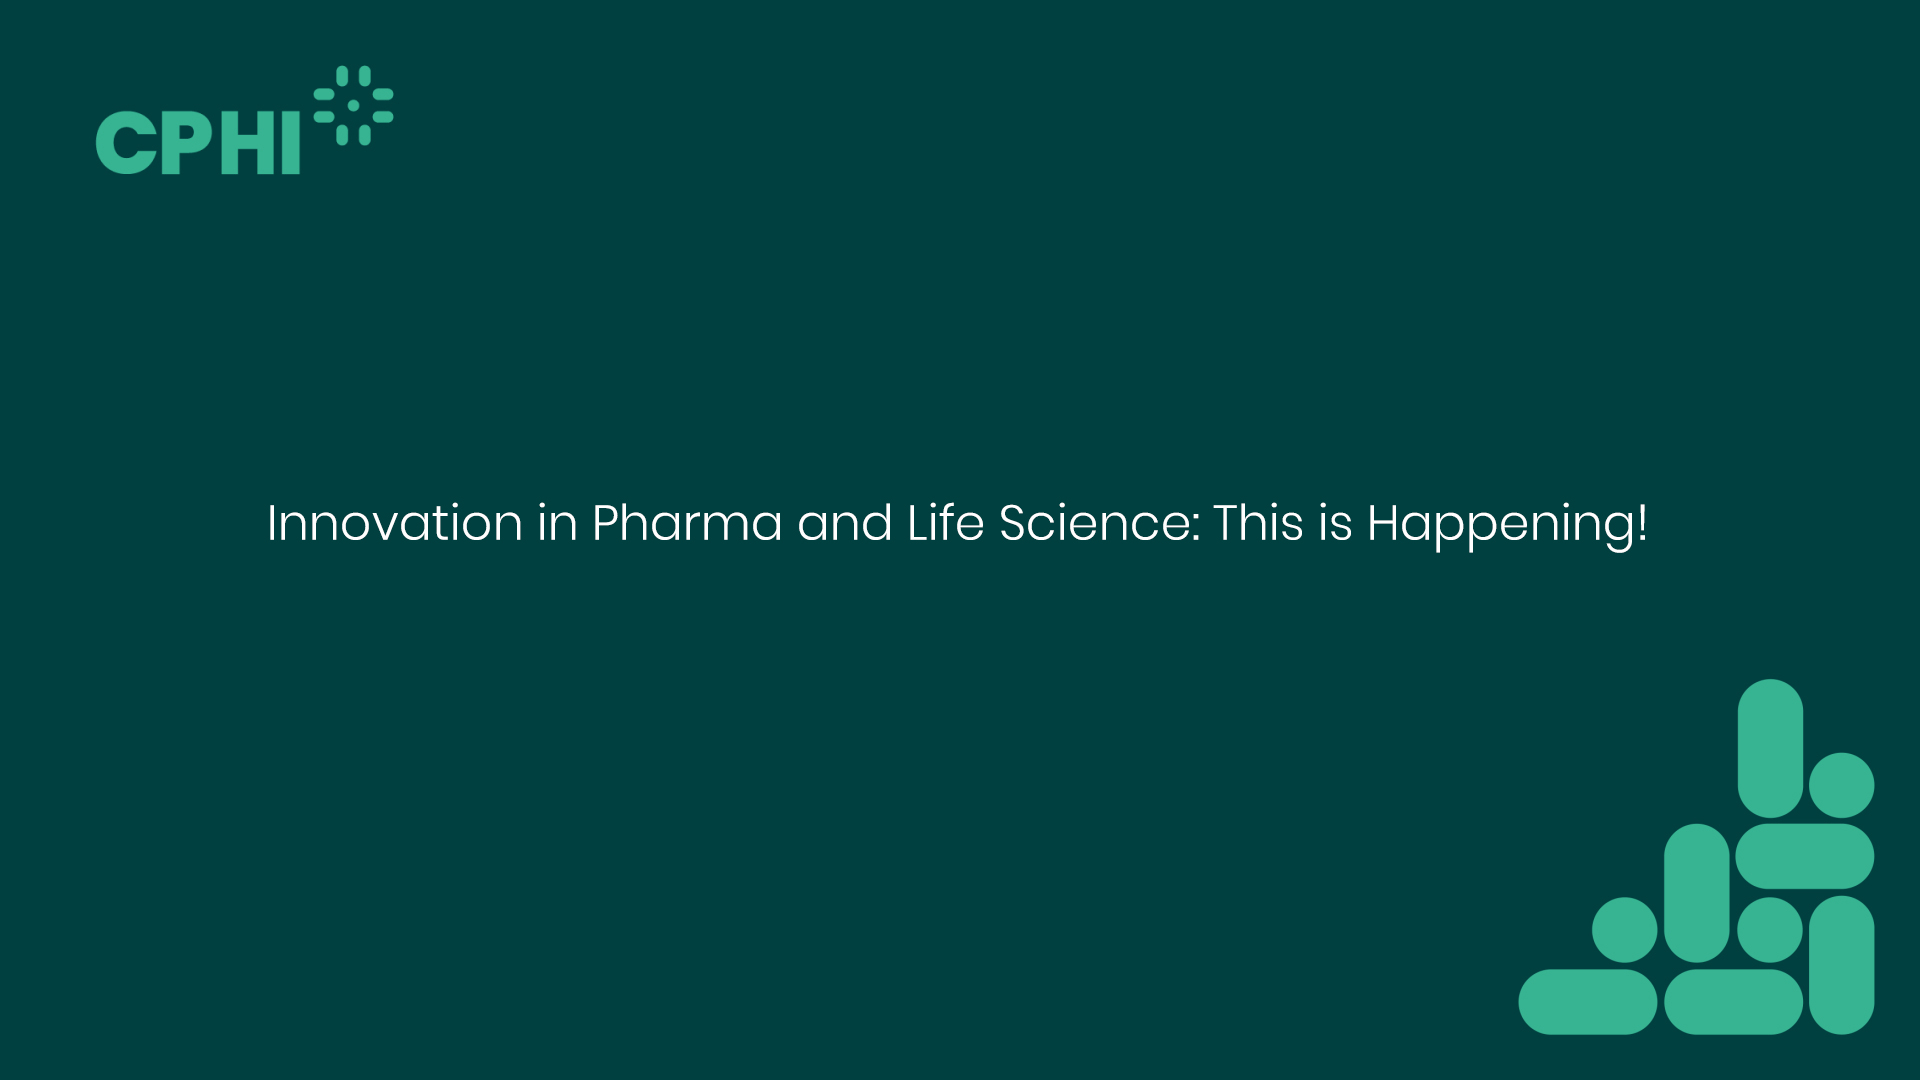 Innovation in Pharma and Life Science: This is Happening!